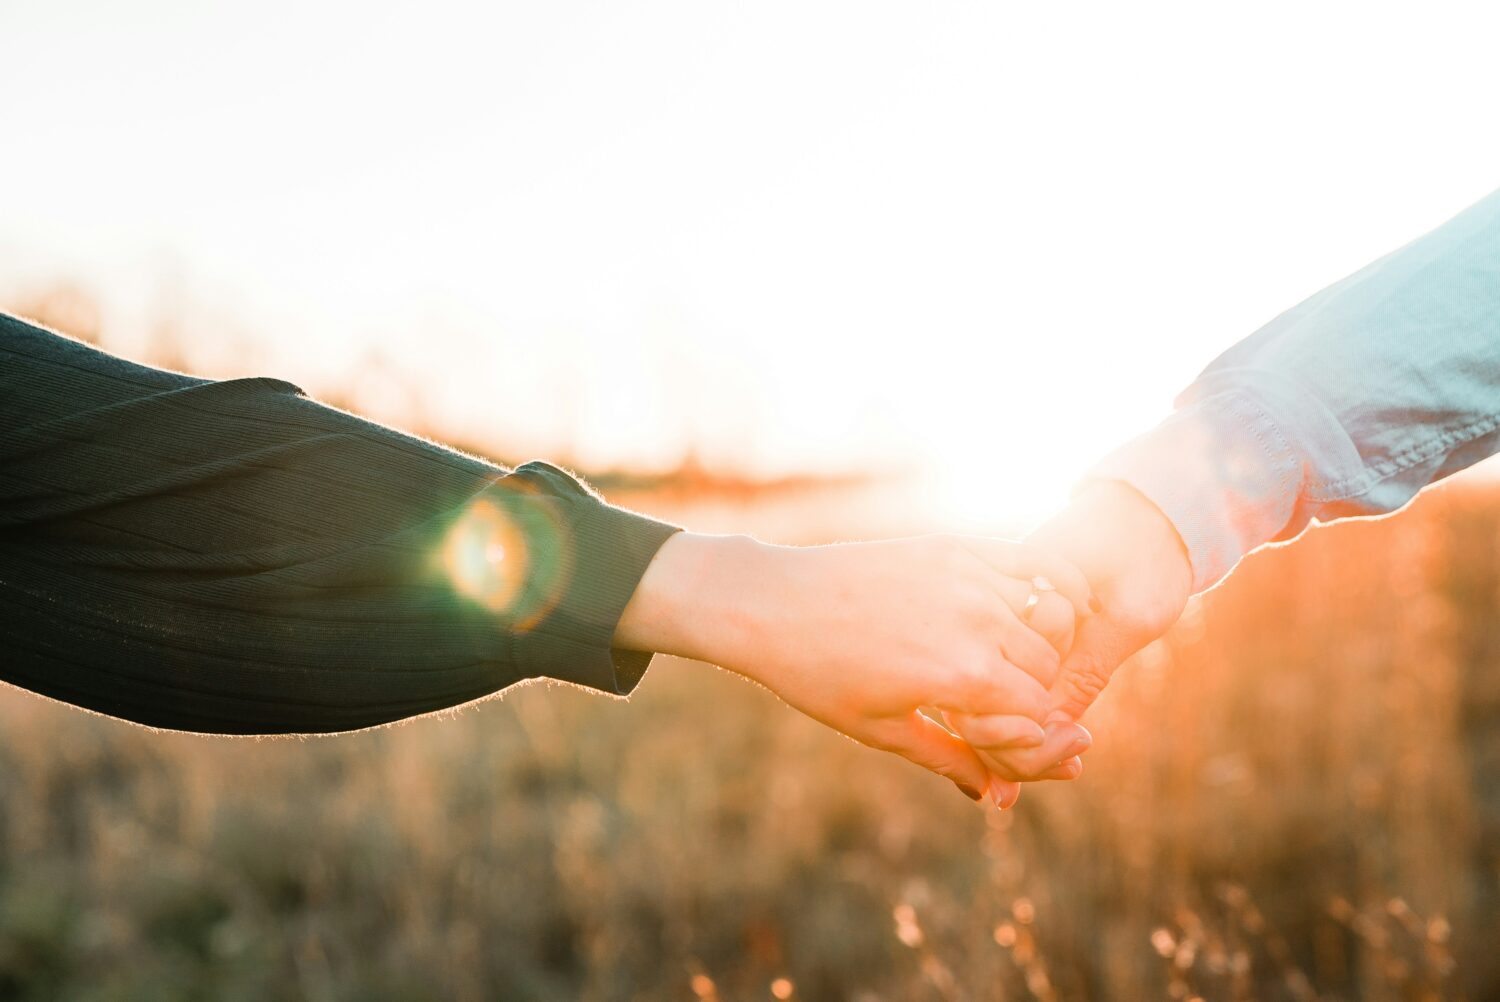 Two held hands in front of a sunny field